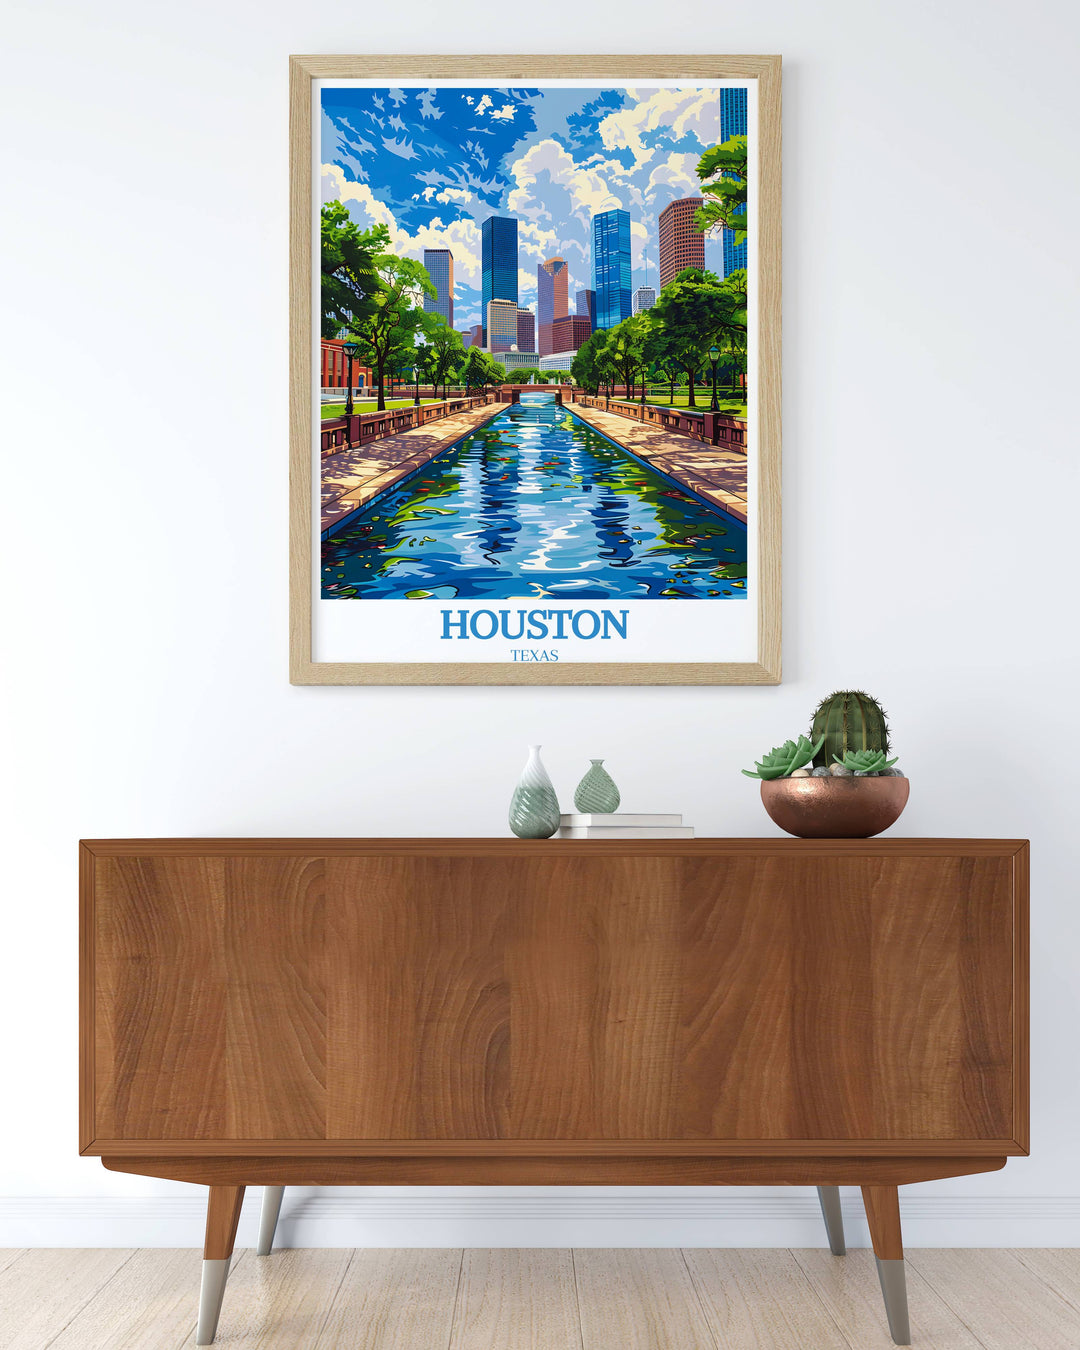 Minimalist Houston print with clean lines and a monochrome palette that focuses on the citys architectural elegance and simplicity, ideal for modern and contemporary spaces.